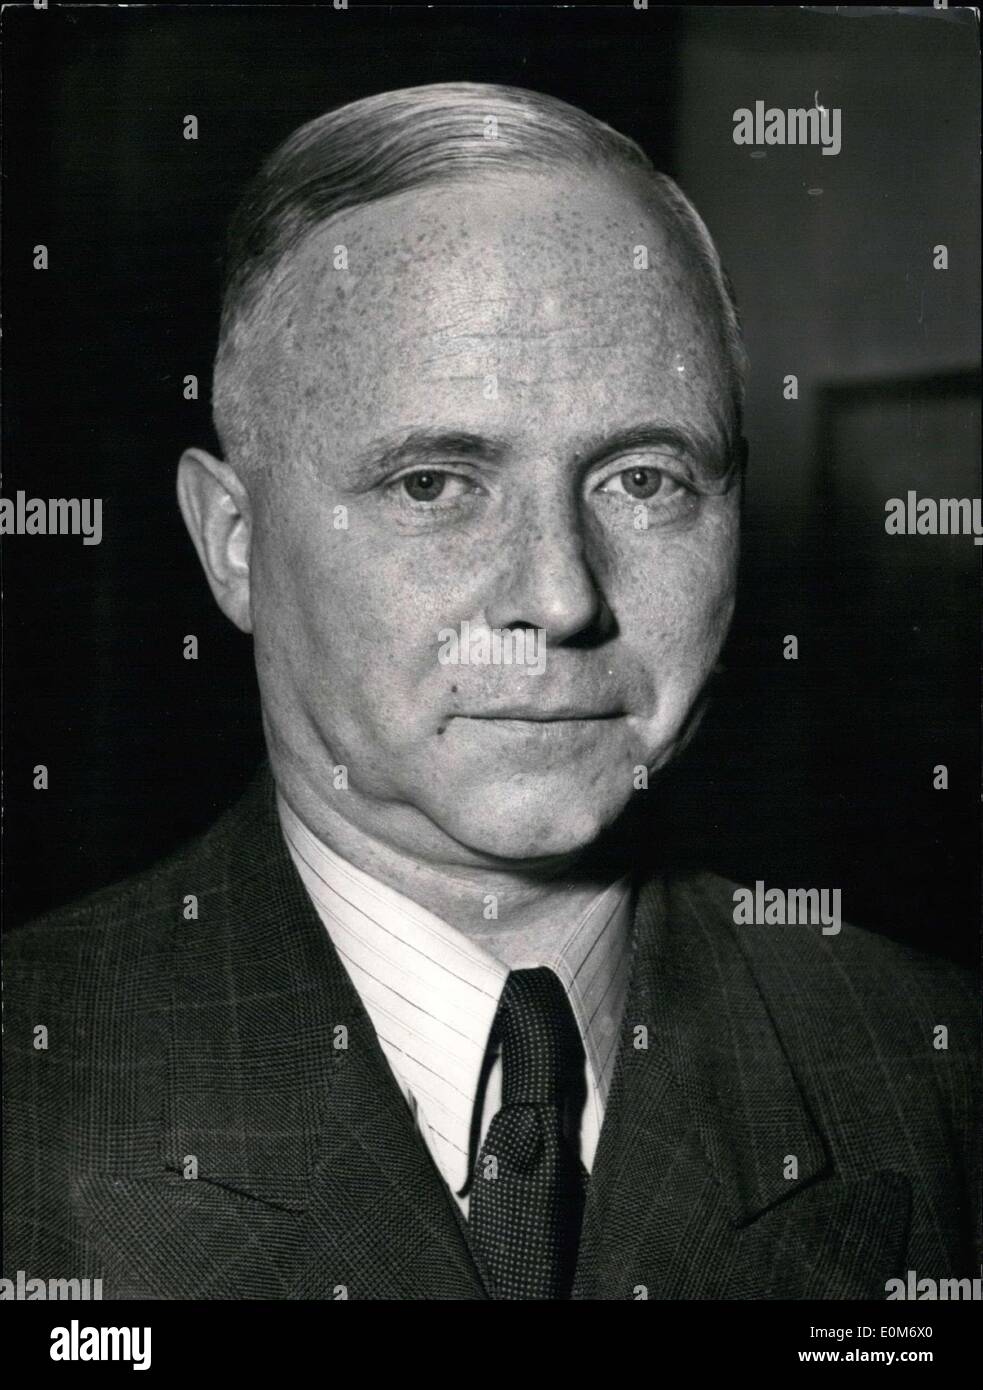 Nov. 01, 1953 - Pictured is the first mayor of Hamburg, Dr. Kurt Sieveking. He was born in Hamburg in 1897 and worked in finance and the senate before taking up this position. Stock Photo